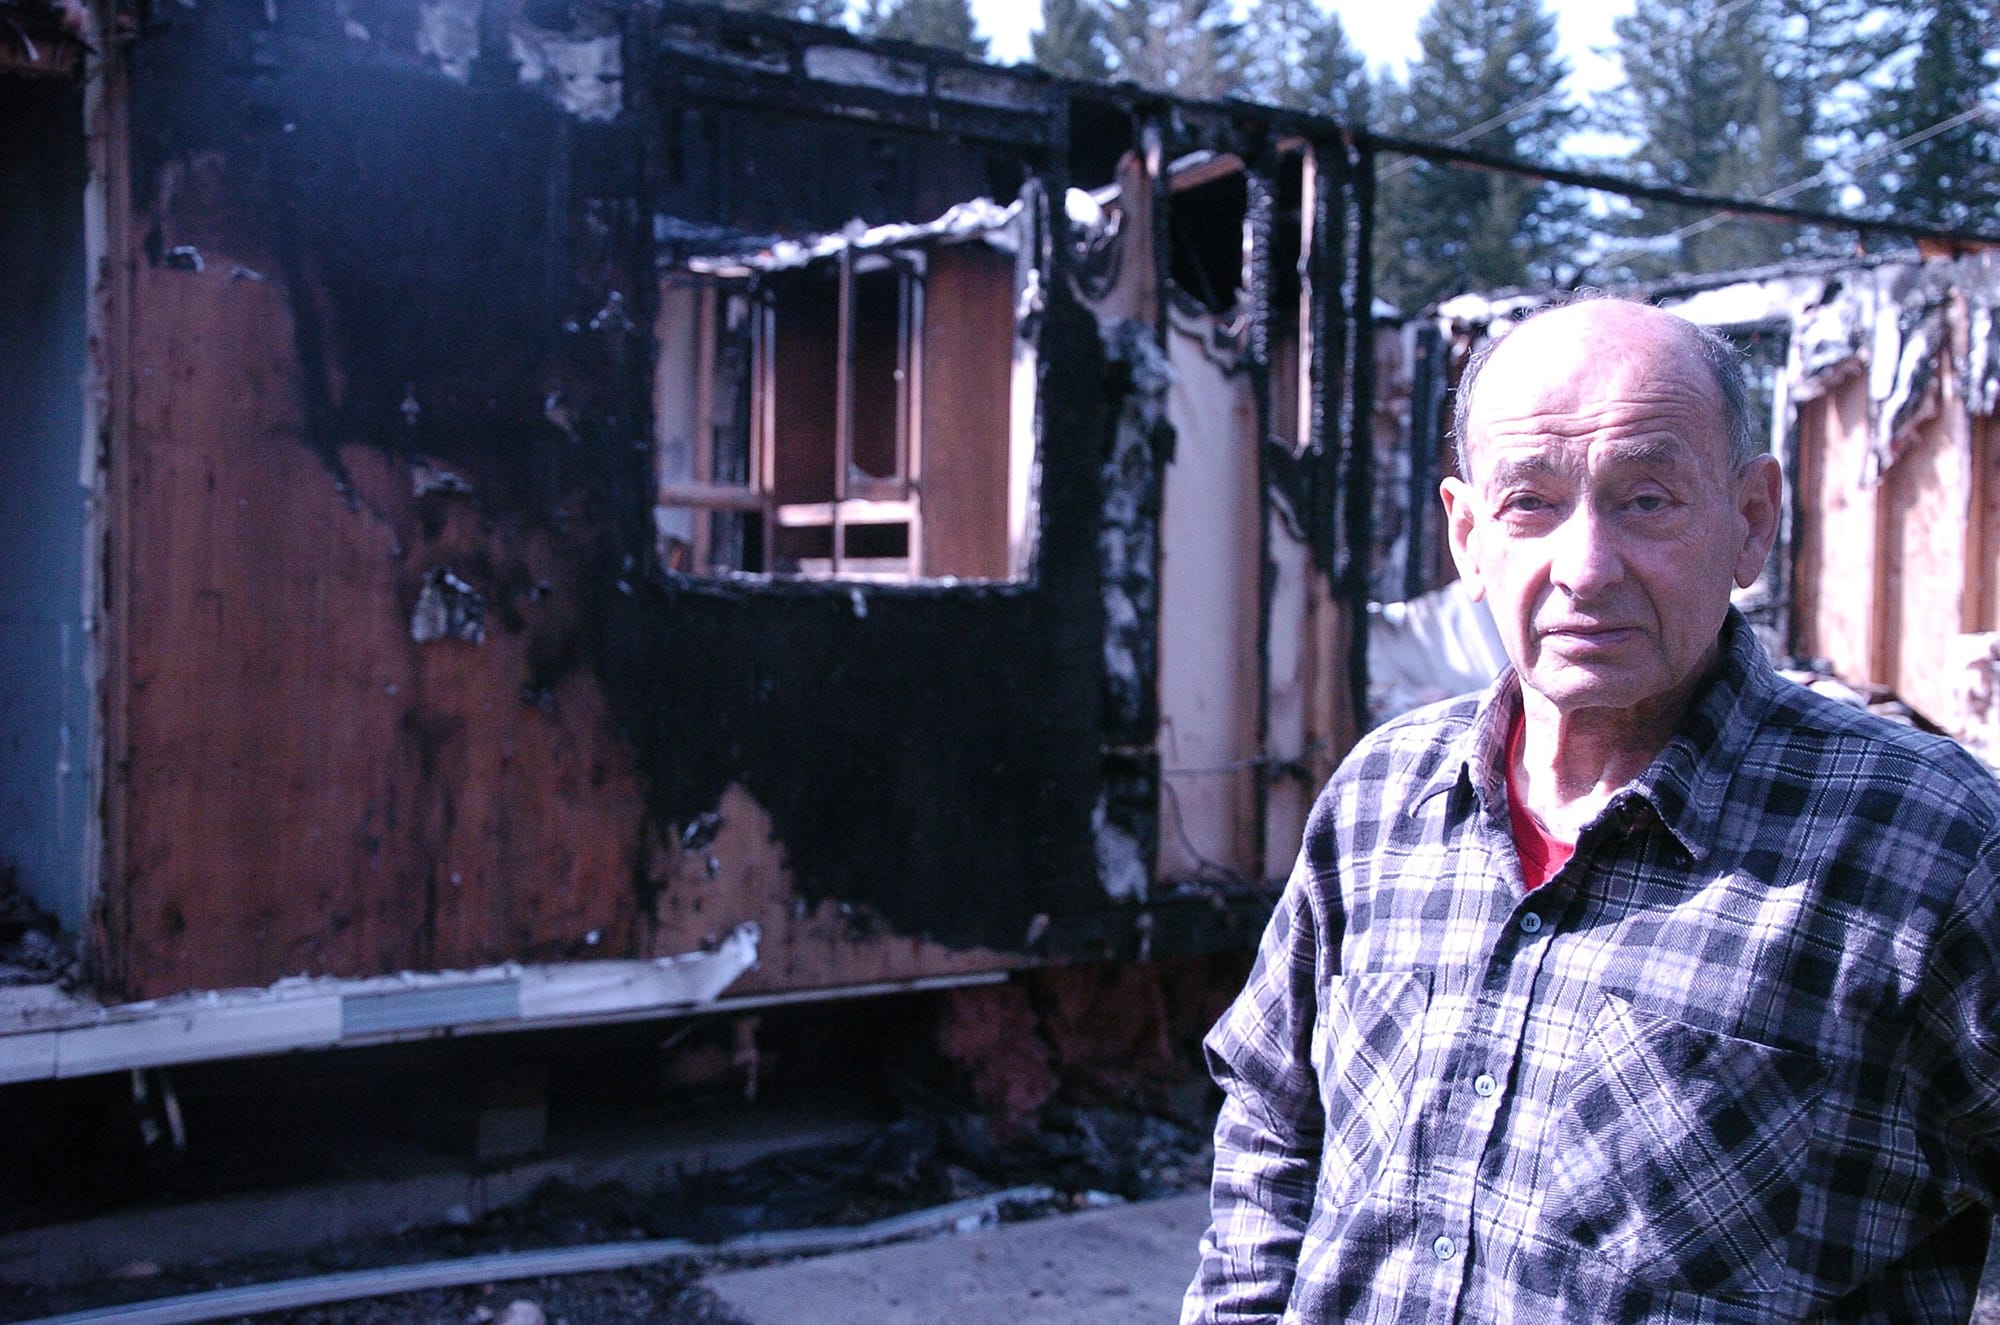 Ed Rodda stands before the charred remains of his double-wide mobile home in La Center.